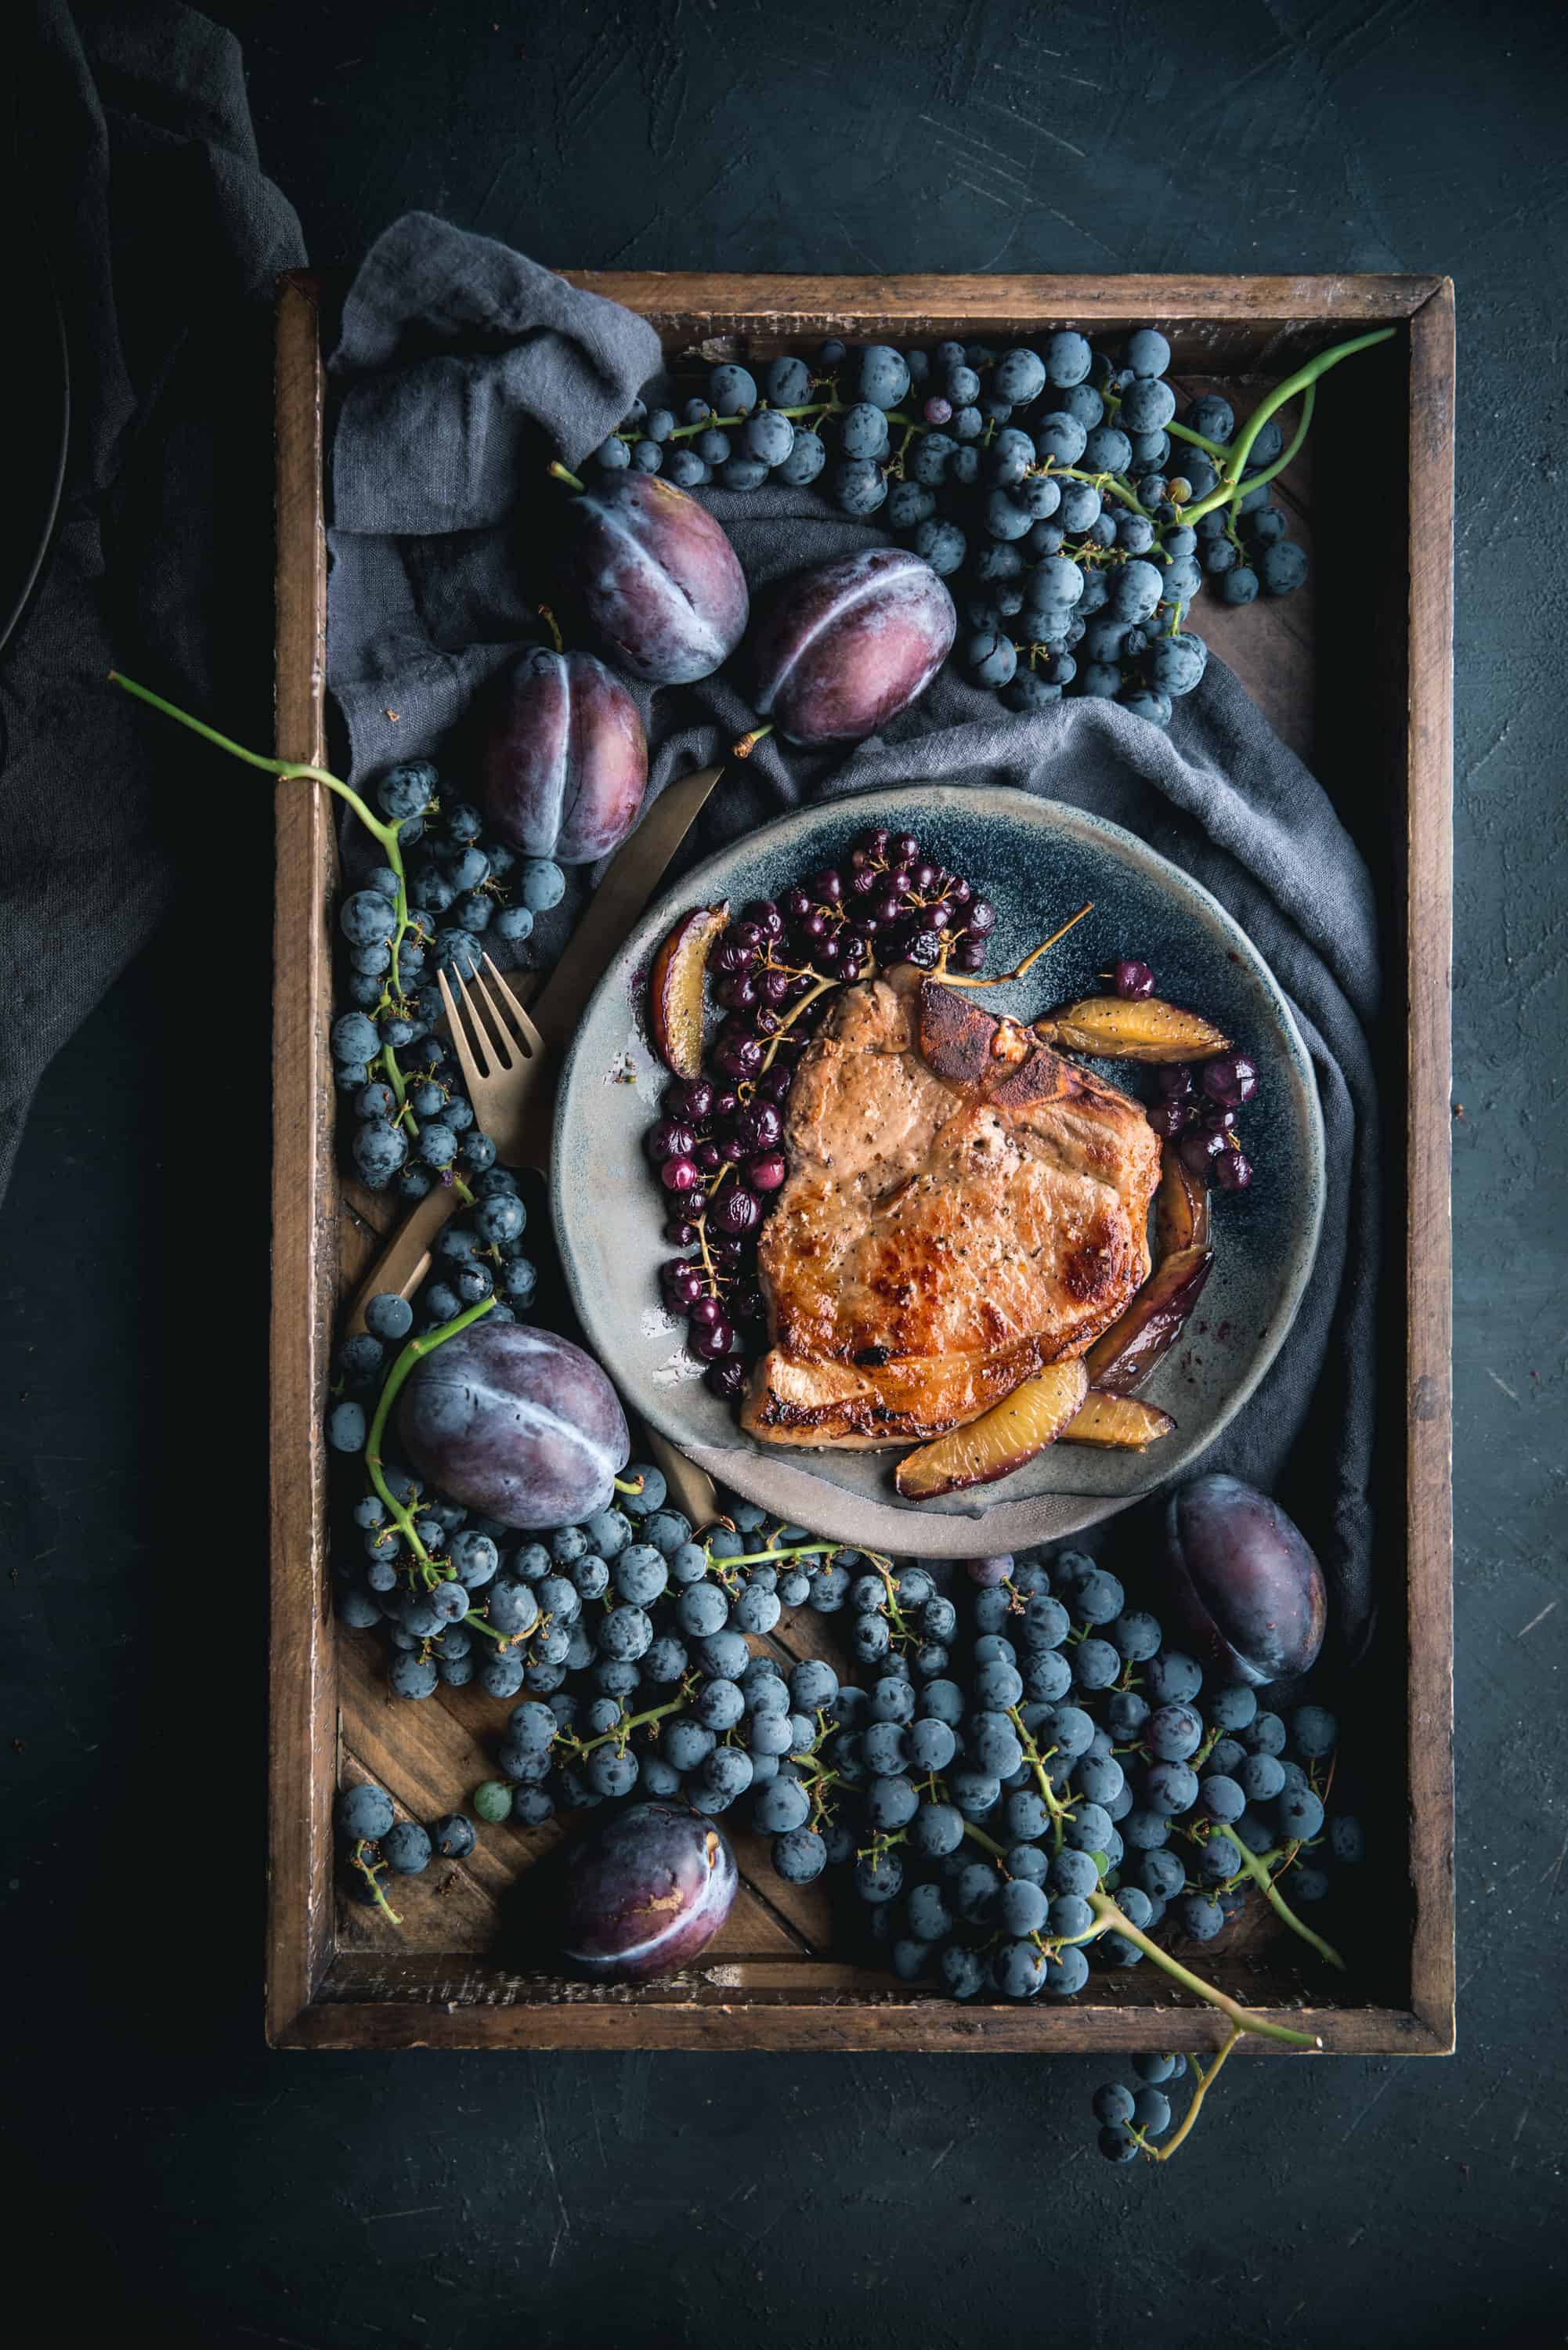 Perfect Brined Bone In Pork Chop with Roasted Grapes and Plums by Eva Kosmas Flores